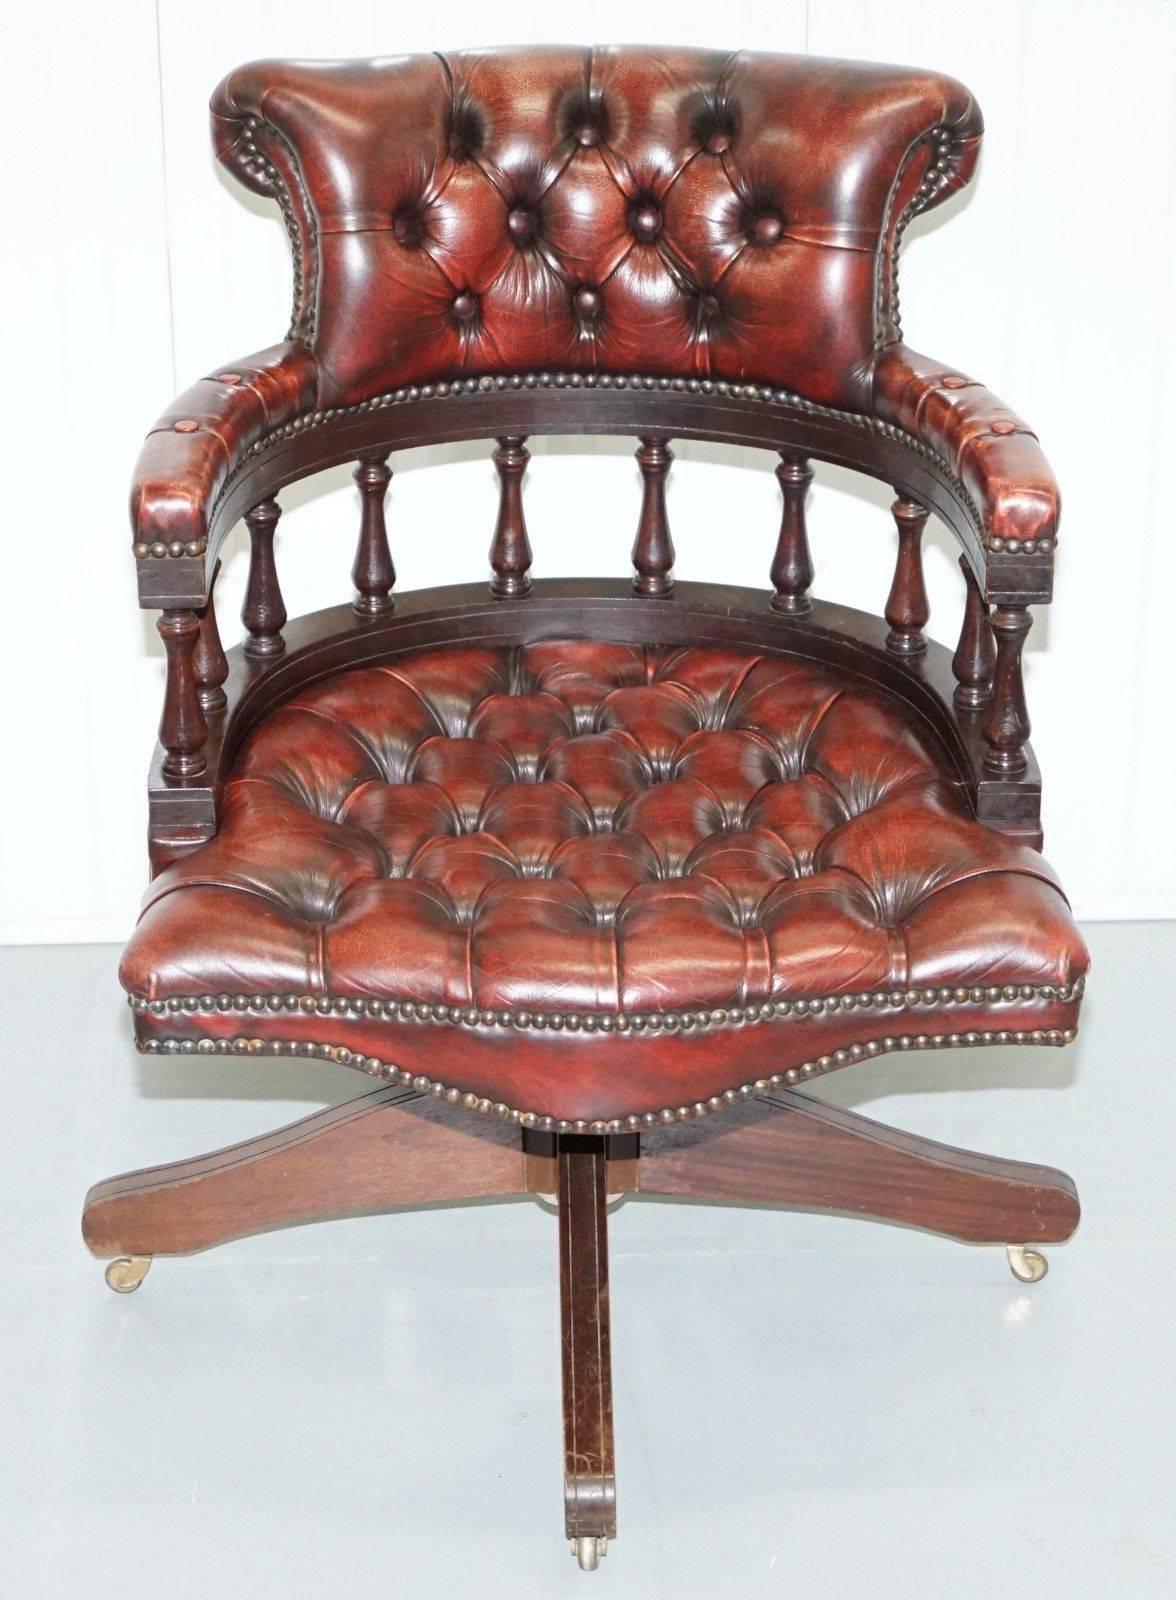 We are delighted to offer for sale this lovely 1967 stamped original Chesterfield aged oxblood leather captain’s chair

Please note the delivery fee listed is just a guide.

The chair was made by the Original Chesterfield Company in 1967, the